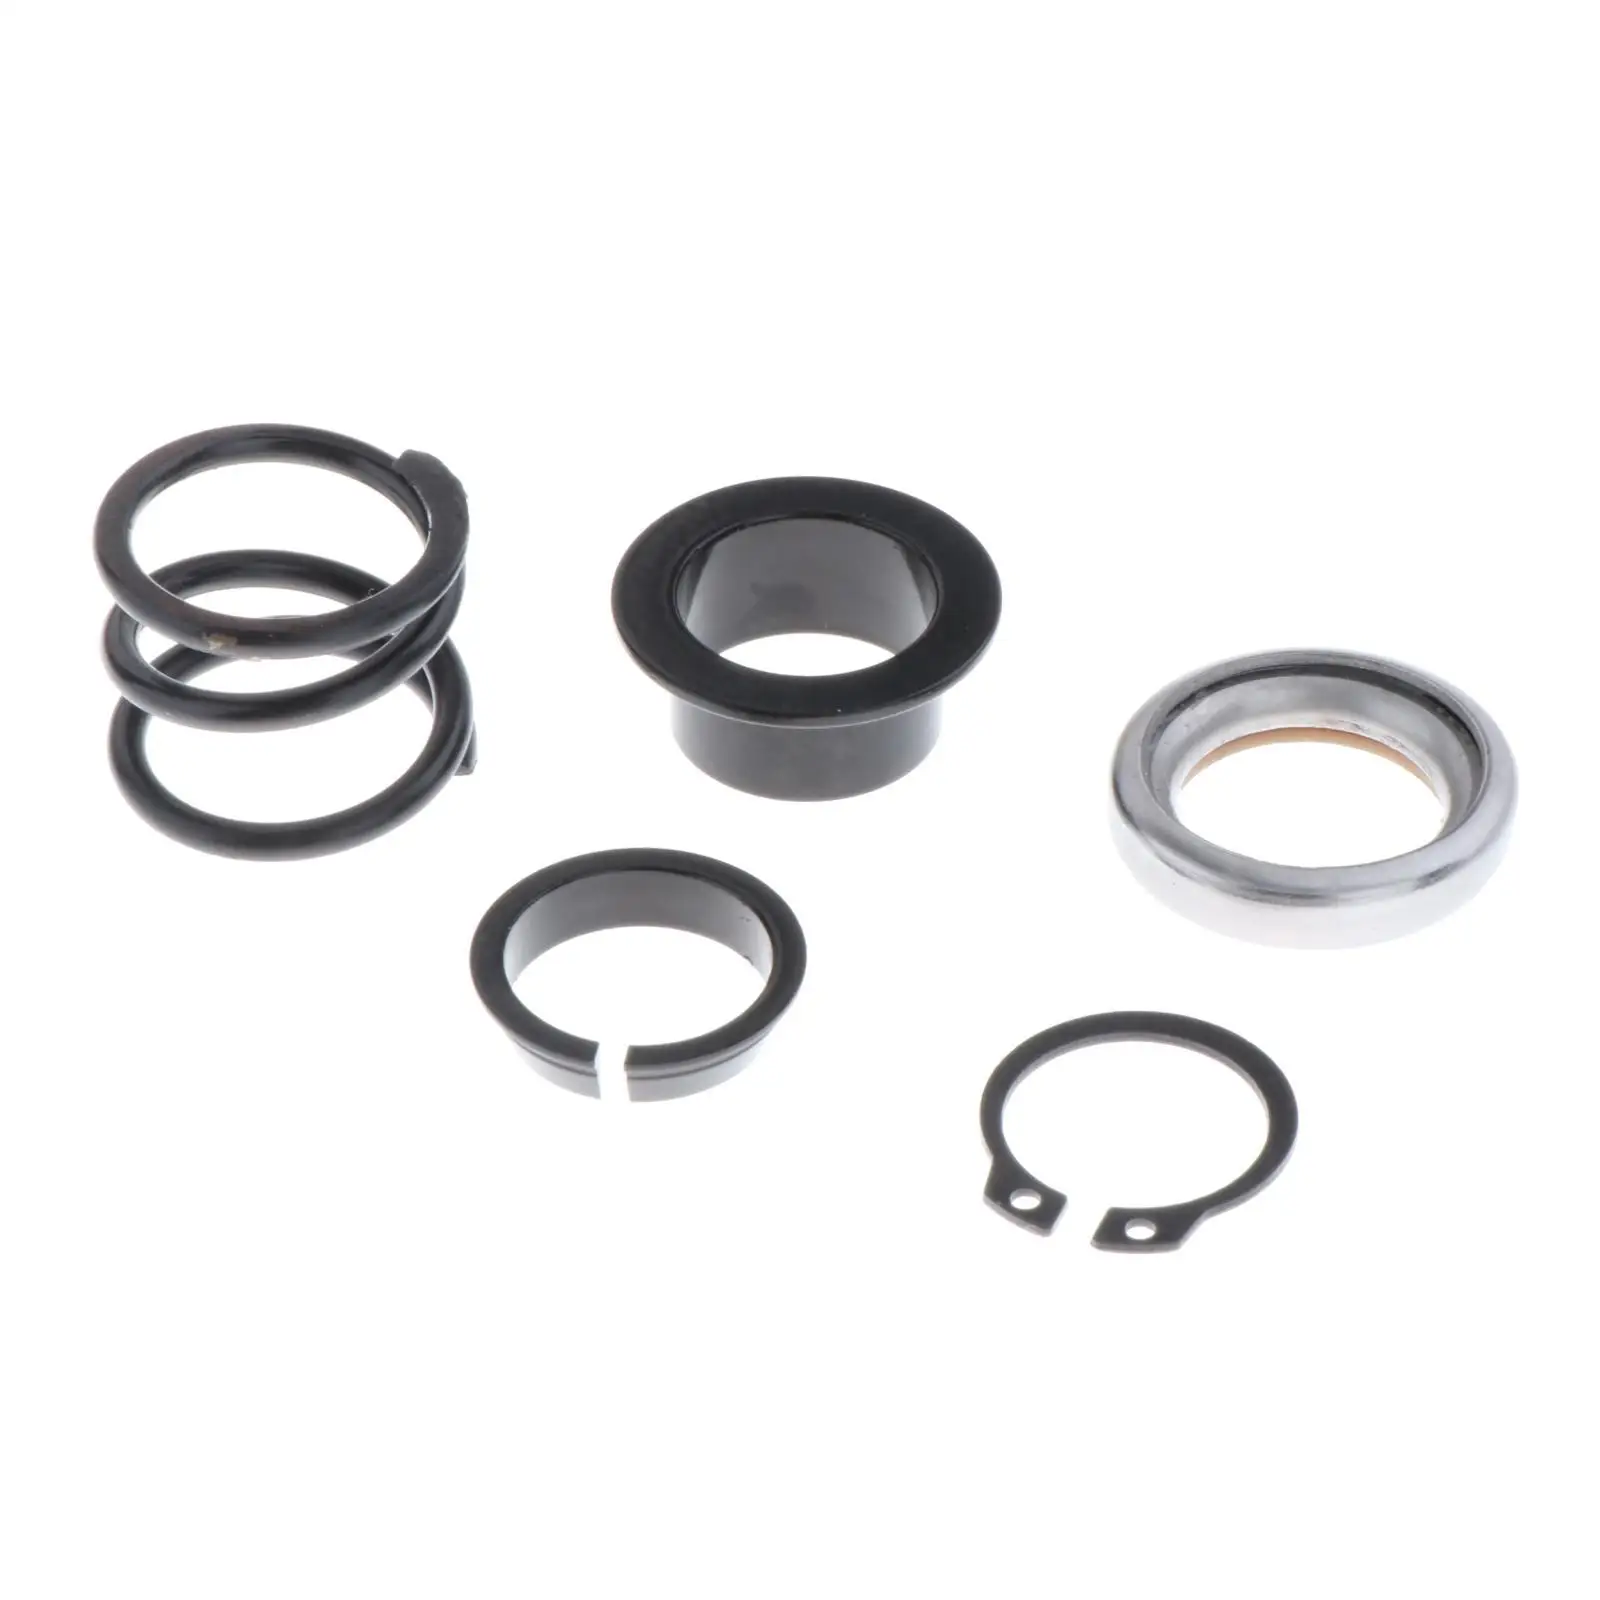 Steering Bearing Kit Accessories Fit for Ford Mercury Lincoln 1992  up